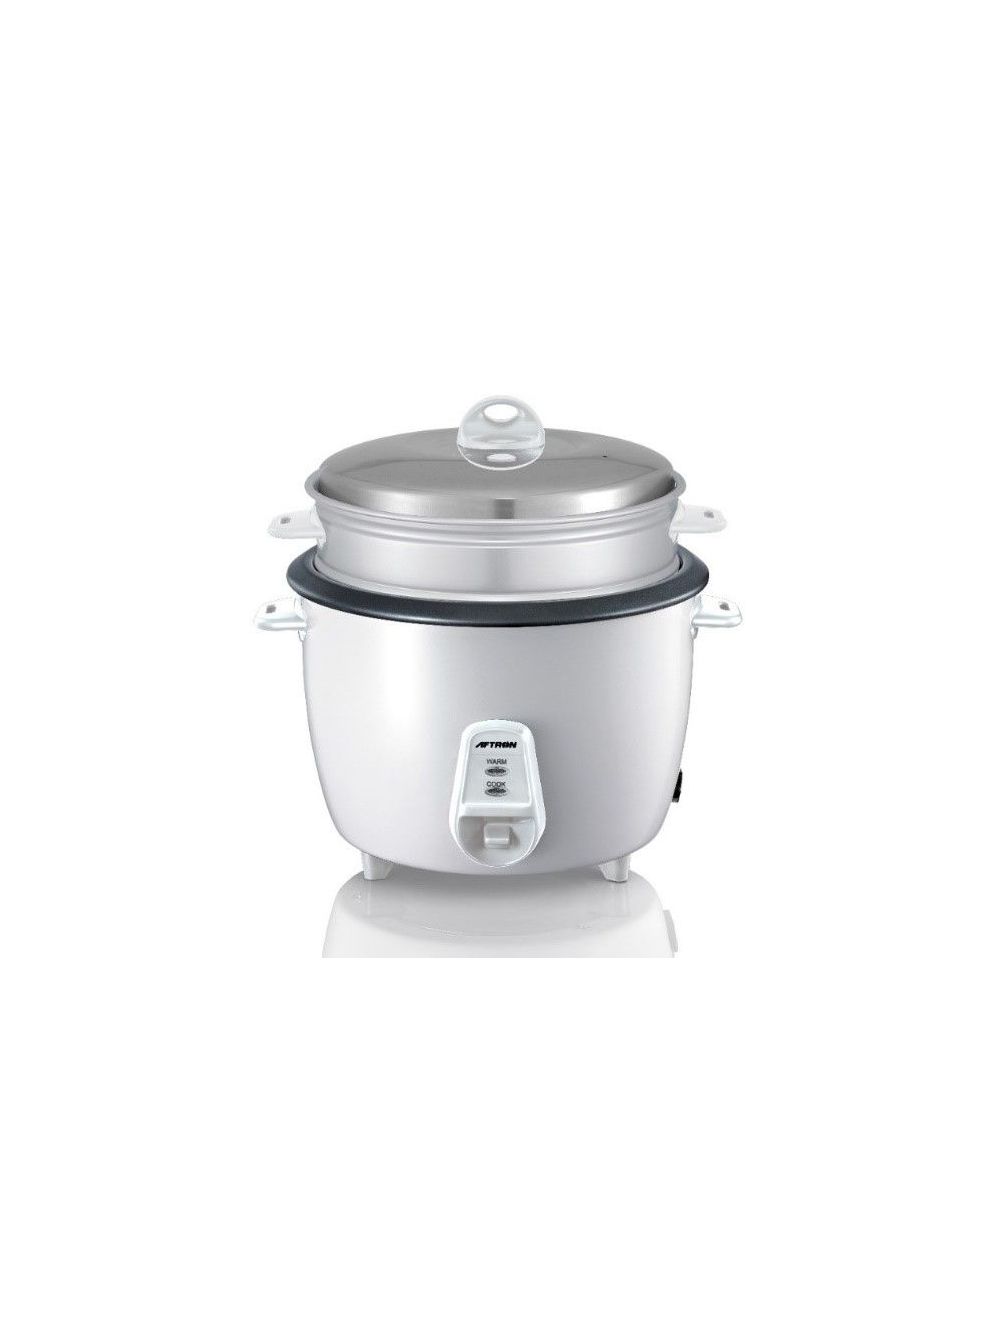 Aftron Electric Rice Cooker 2.8L  White-AFRC2800N